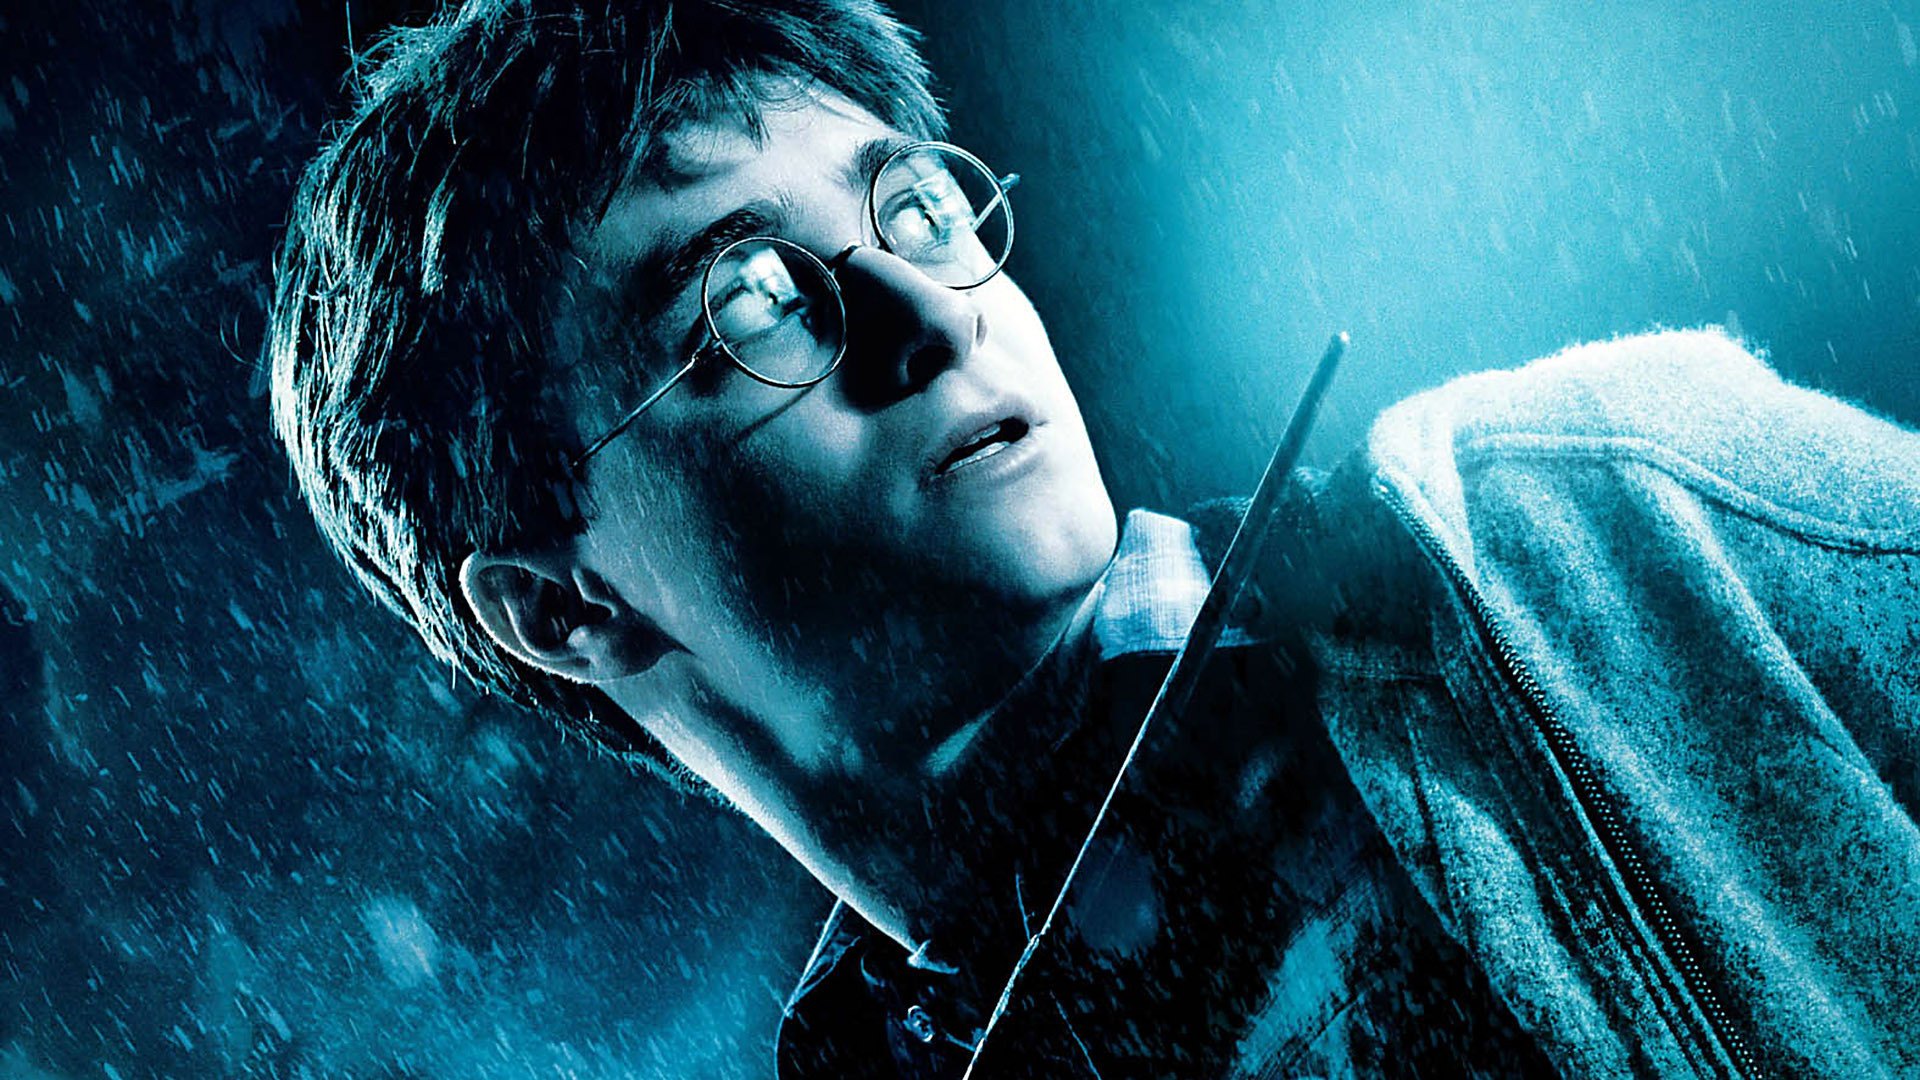 daniel radcliffe, harry potter, movie, harry potter and the half blood prince lock screen backgrounds